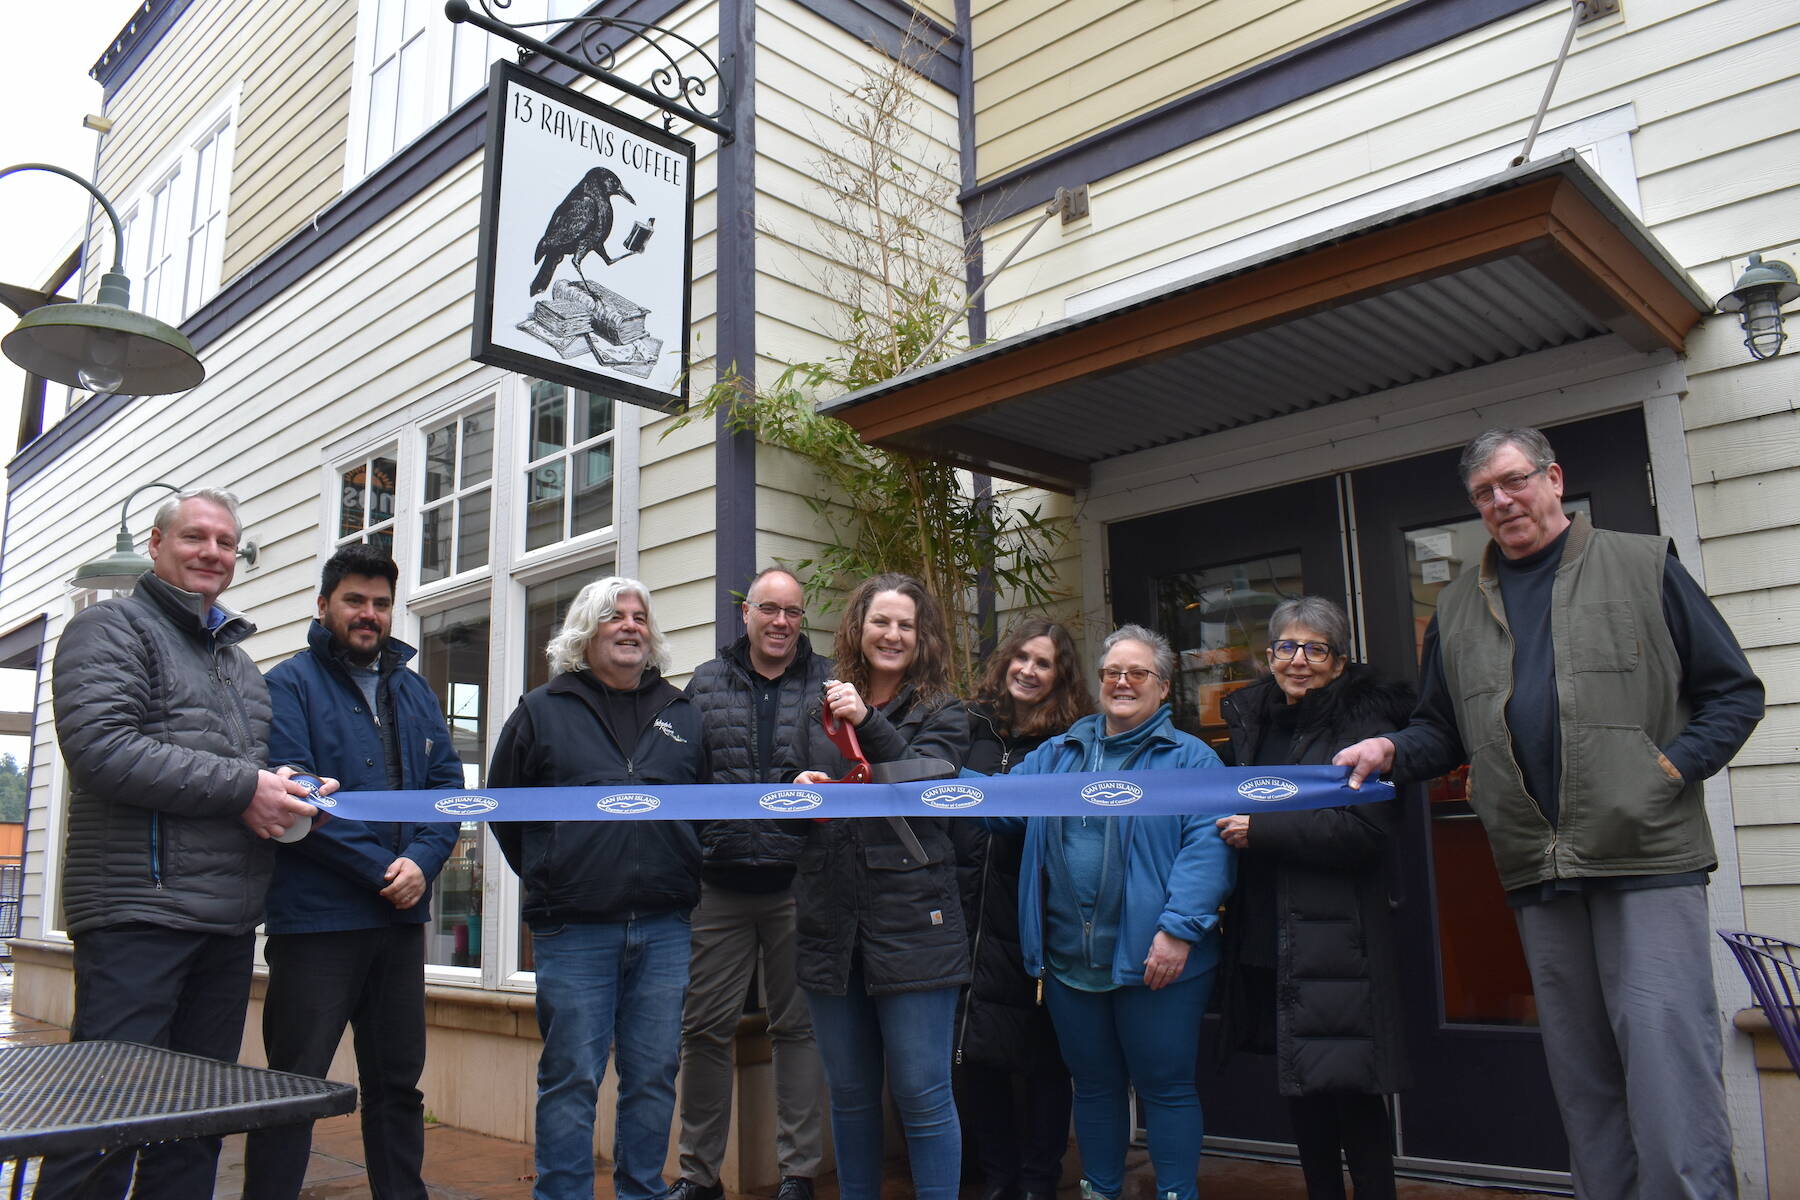 Kelley Balcomb-Bartok Staff photo
13 Ravens owner Liberty Miller is surrounded by members of the San Juan Island Chamber of Commerce during a ribbon-cutting event Tuesday, Feb. 28 celebrating her official opening. Members of the chamber include (l-r) Scott Sluis, Roberto Moya, Karl Bruno, David Cope, Liberty Miller, Deborah Hoskinson, Kris Brown, Executive Director Becki Day, and Steve Hushebeck.